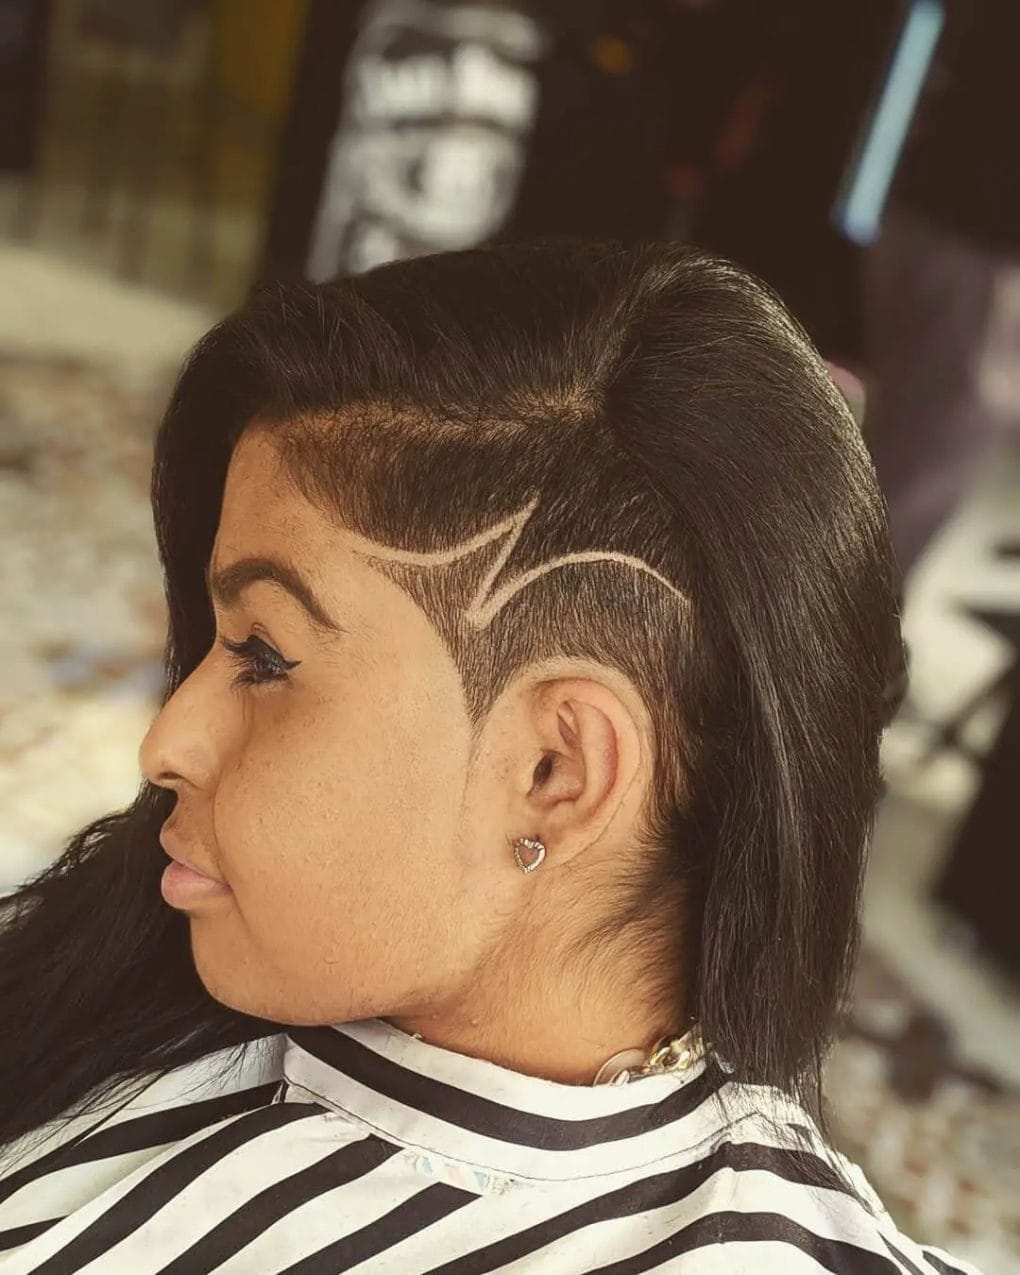 Black hair with a side-swept layer hiding a detailed undercut with curved and angular patterns.